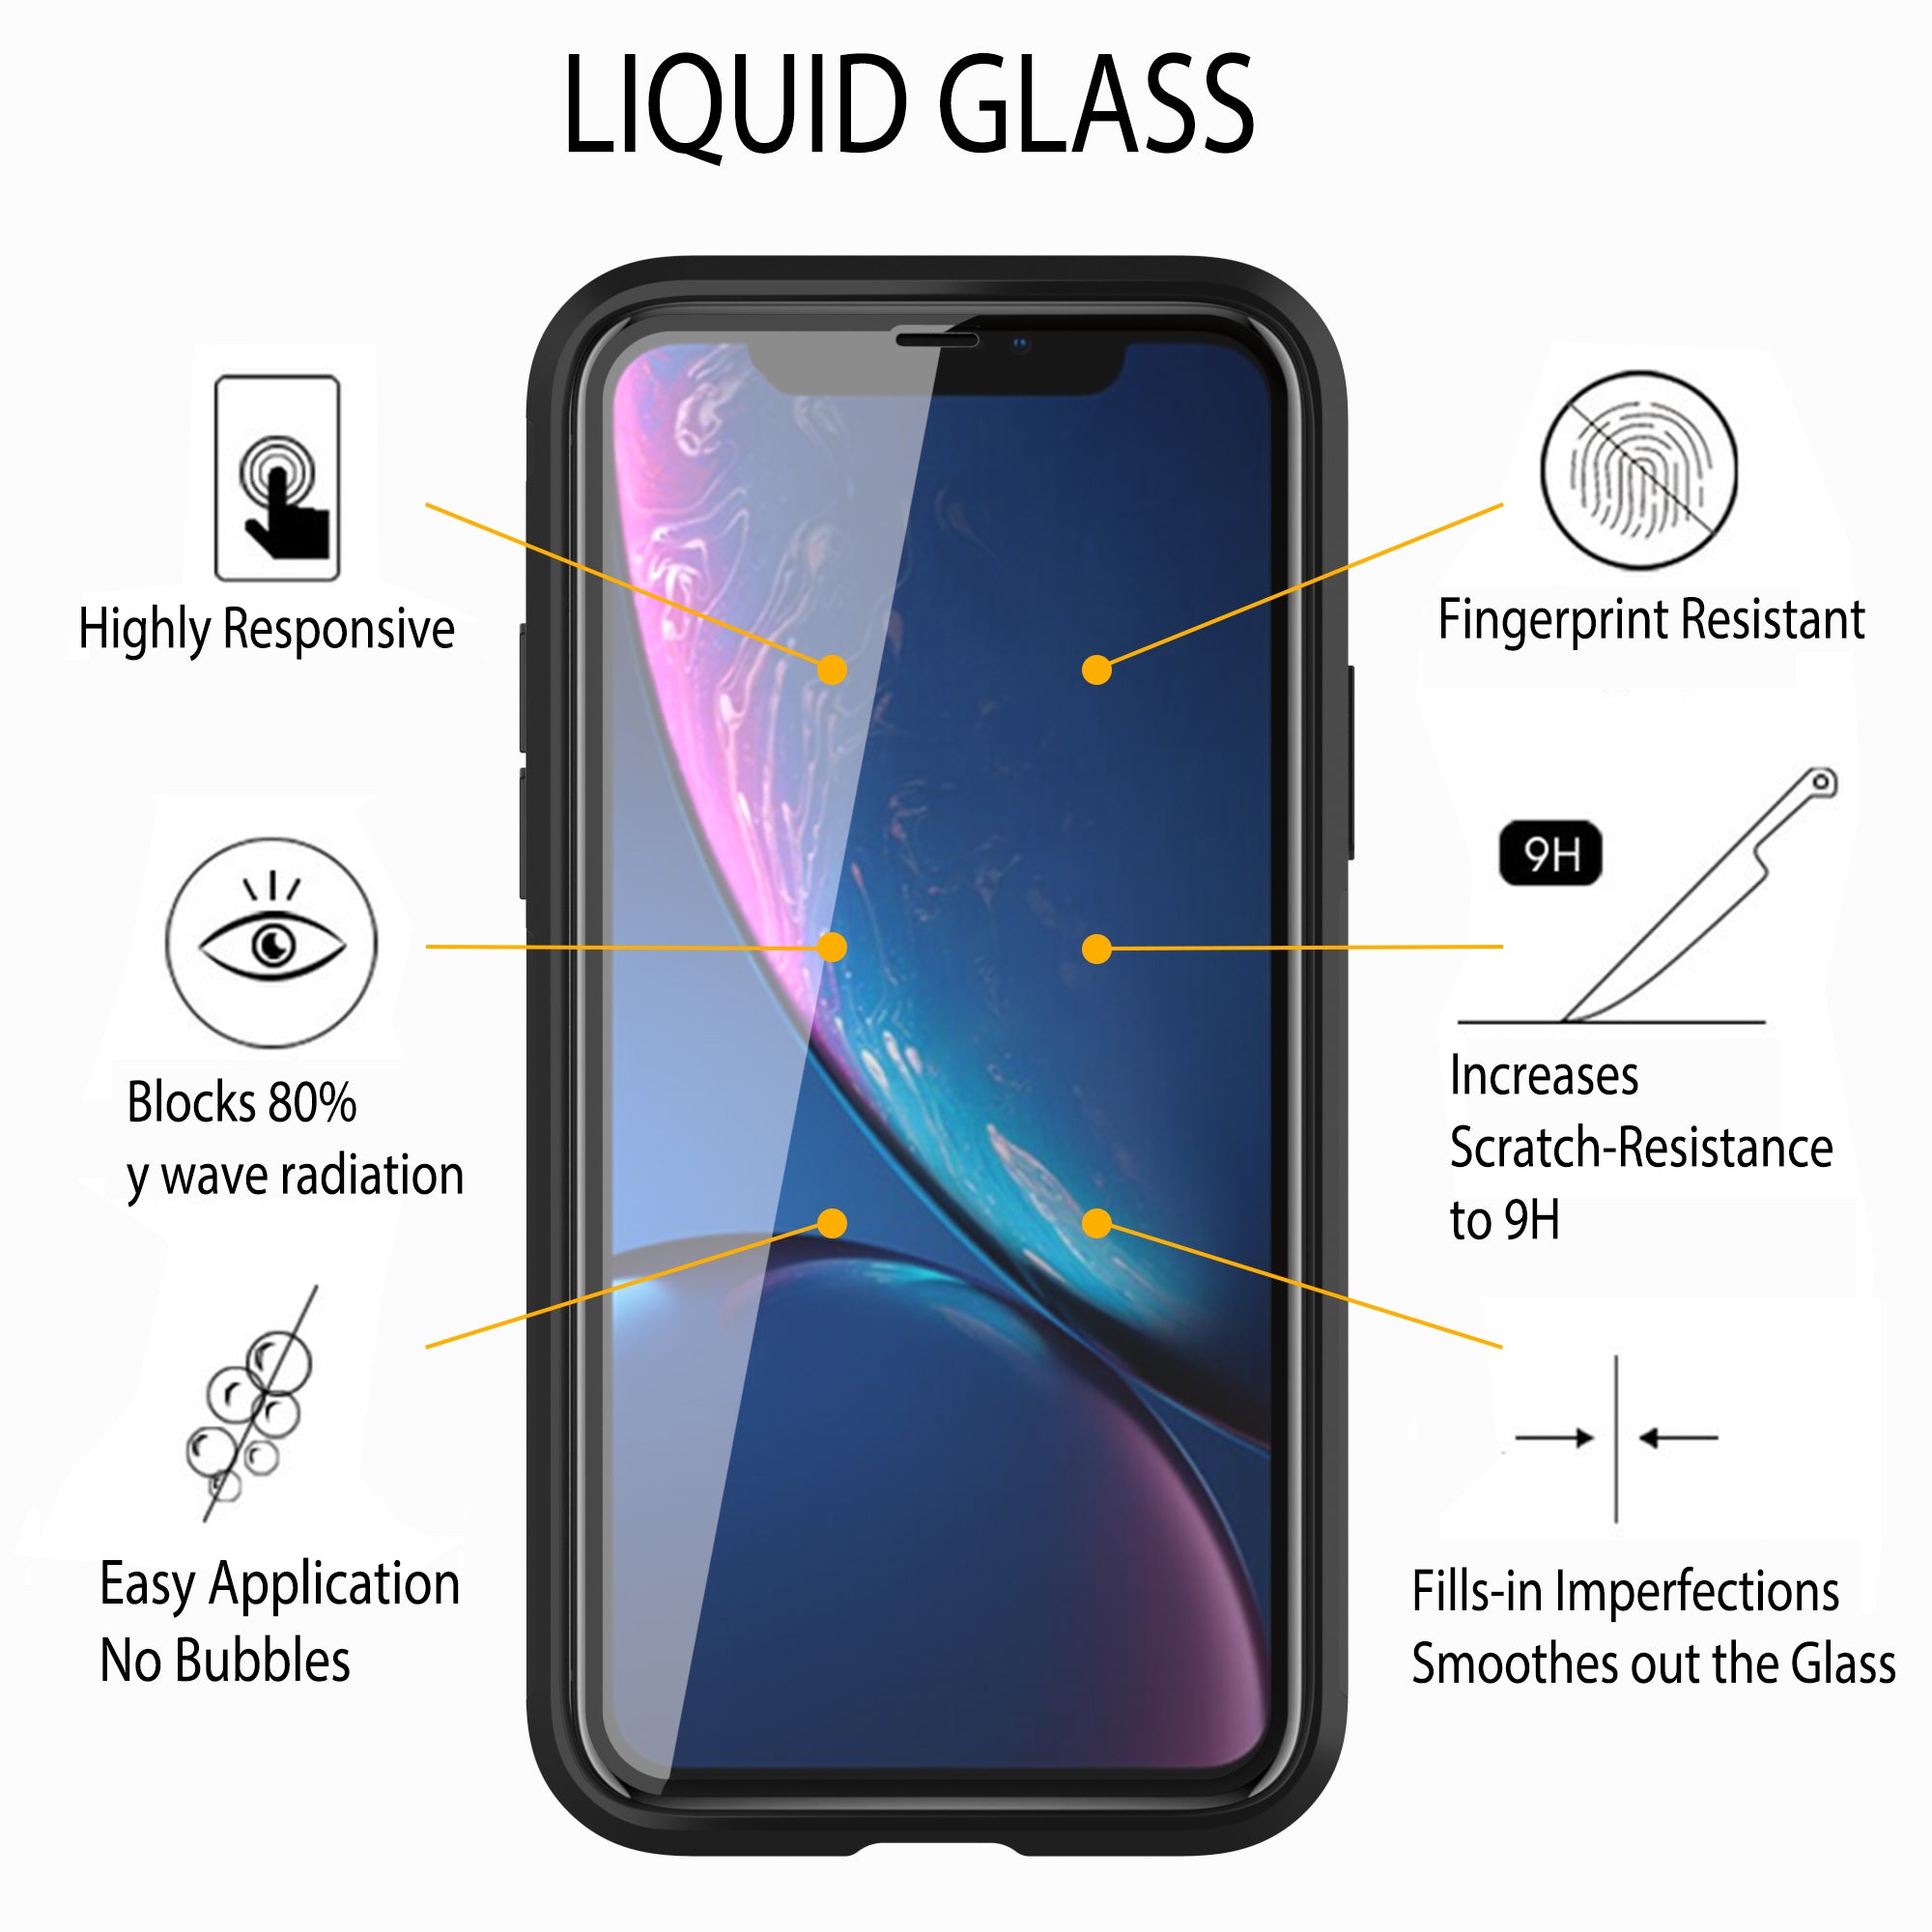 Liquid Glass Screen Protector with $350 Screen Replacement Guarantee - Universal